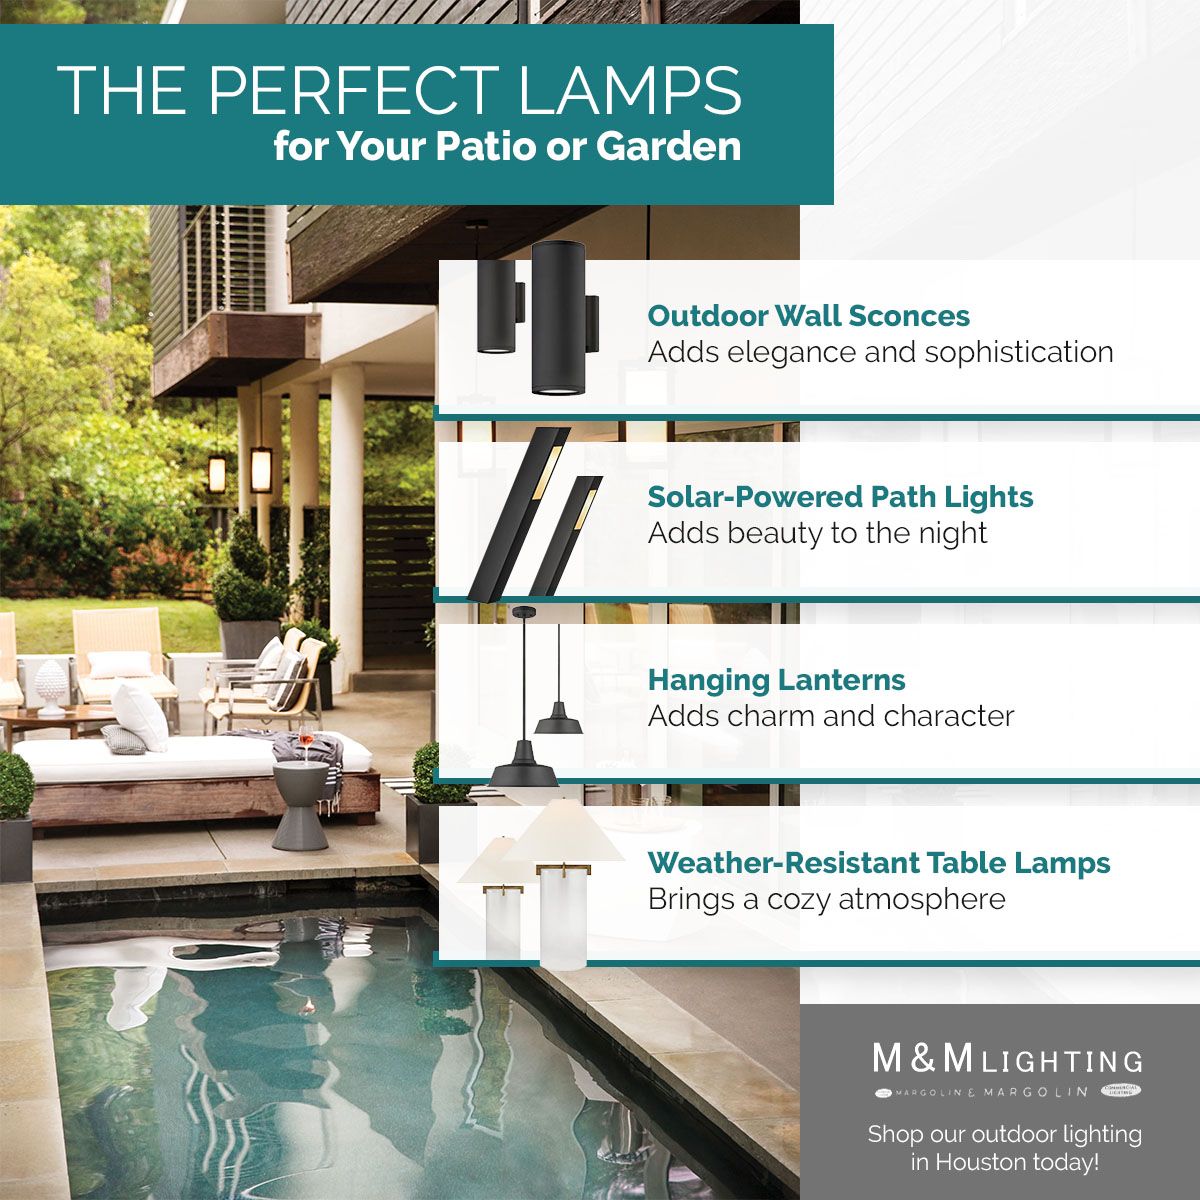 IG-Perfect-Lamps-for-Patio-650dd5959c587.jpg